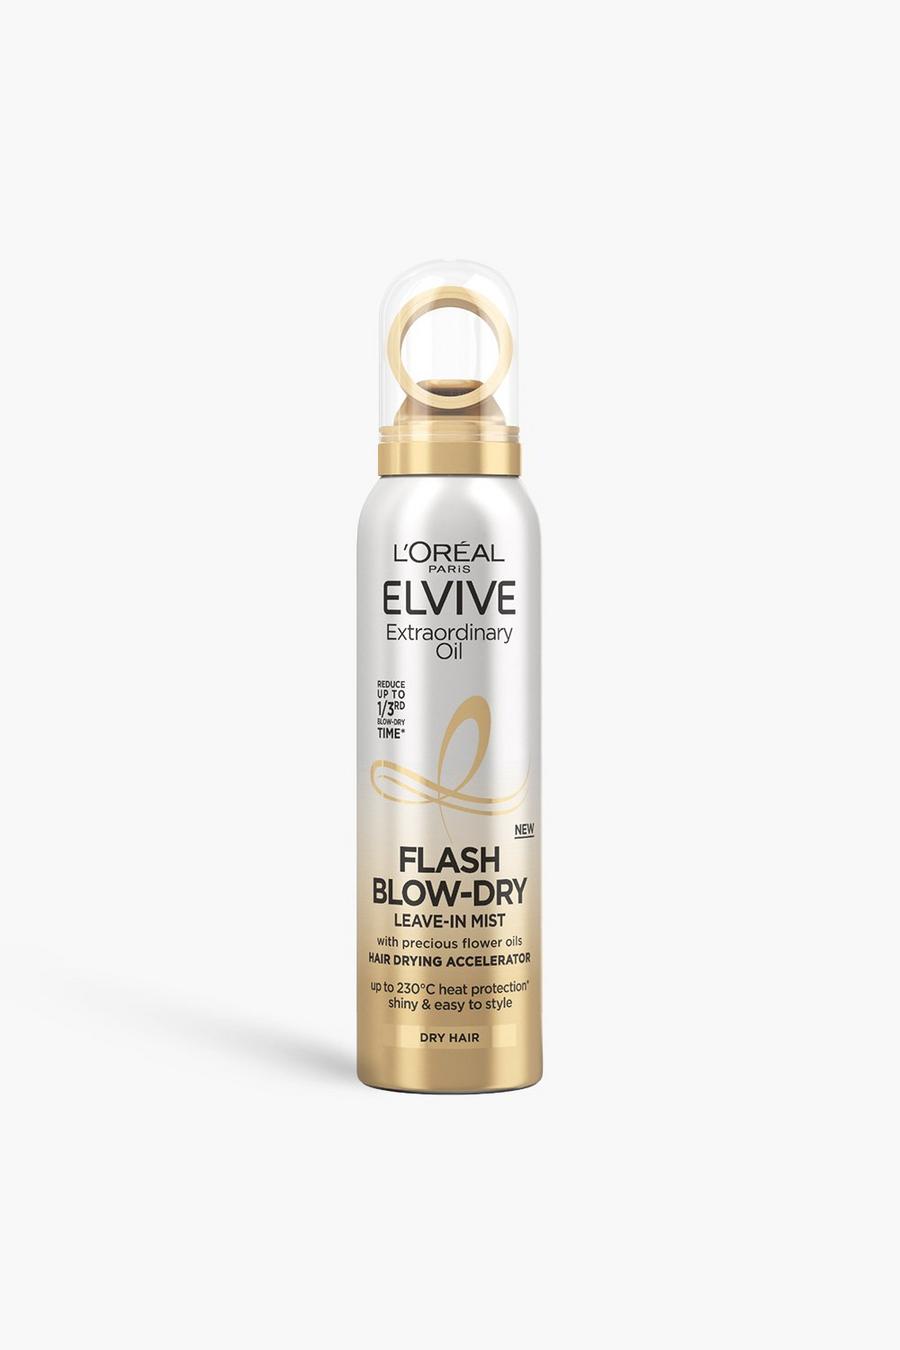 Clear L'Oreal Elvive Extraordinary Oil Flash Blowdry Leave-in Mist, for dry hair